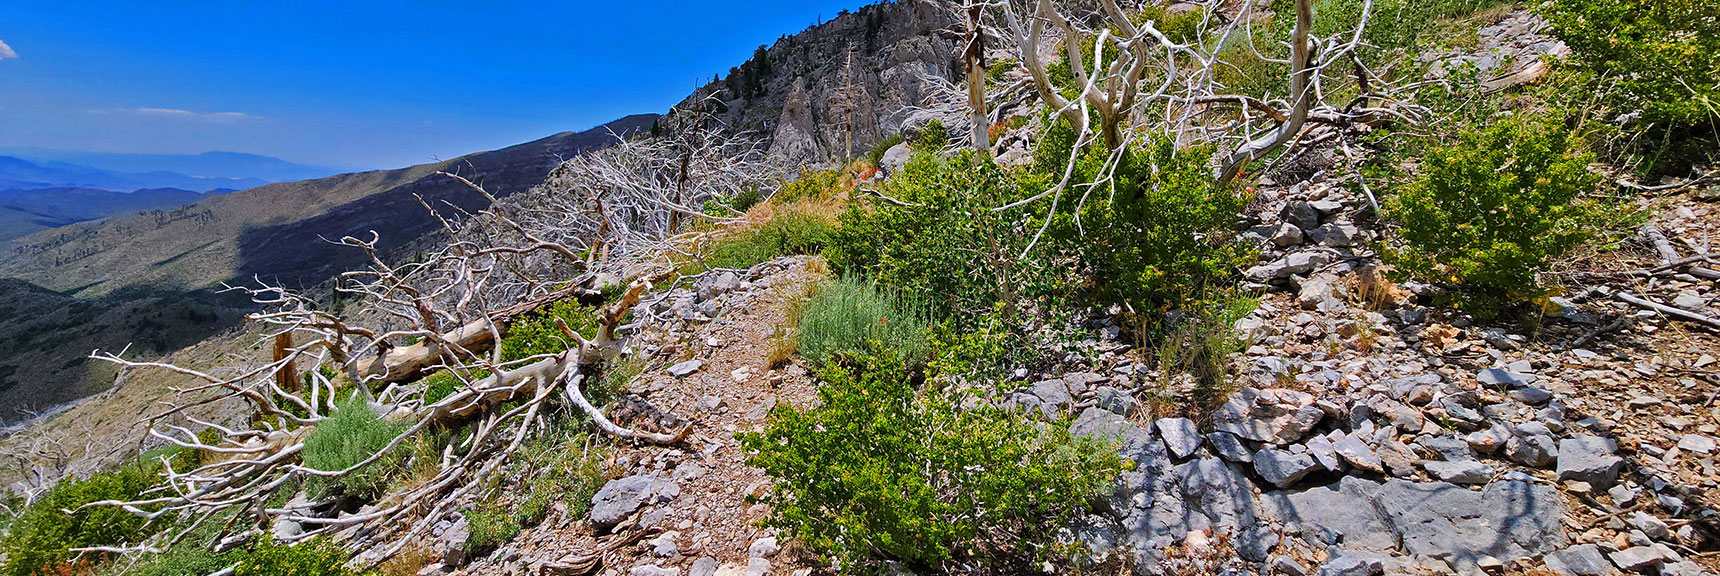 Nice, Well Designed Trail Approaches Cliff Face. | Fletcher Canyon Trailhead to Harris Mountain Summit to Griffith Peak Summit Circuit Adventure | Mt. Charleston Wilderness, Nevada